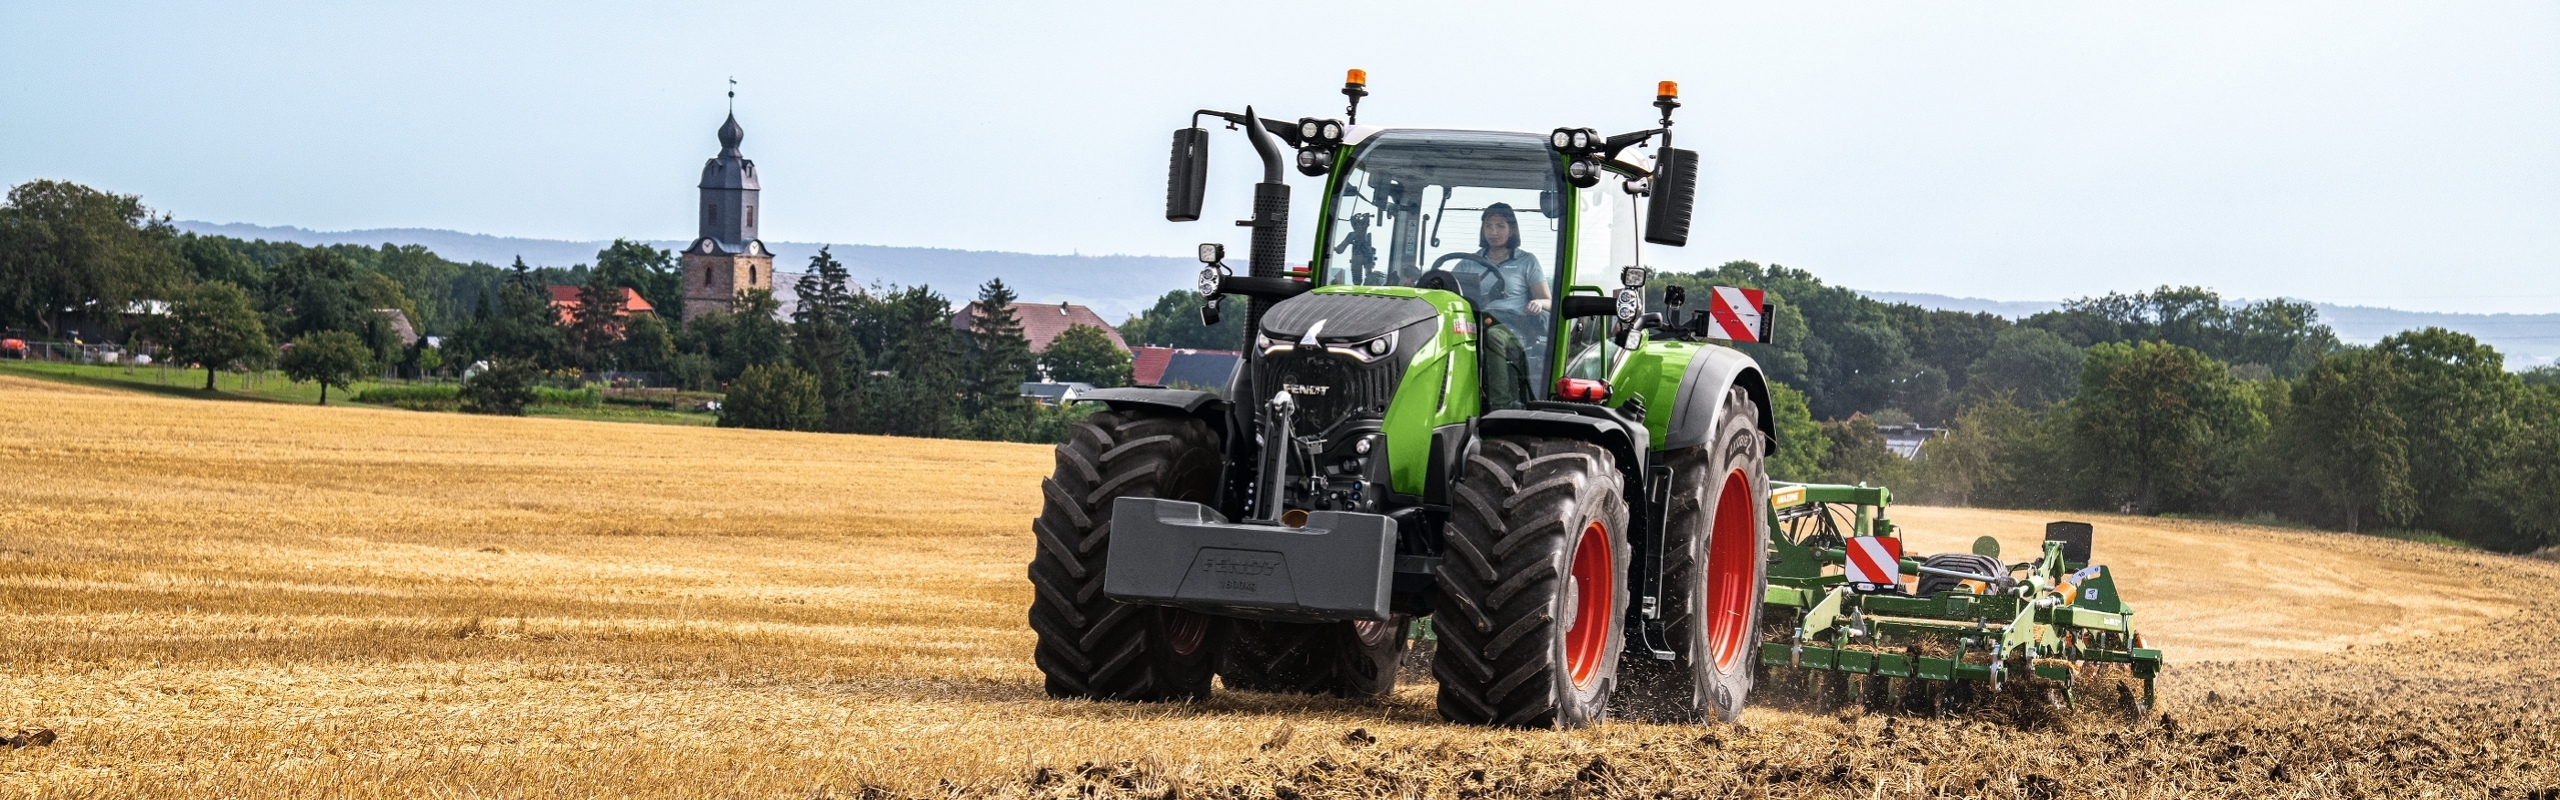 Fendt 700 Vario Gen7 in use in the field with an Amazone cultivator.